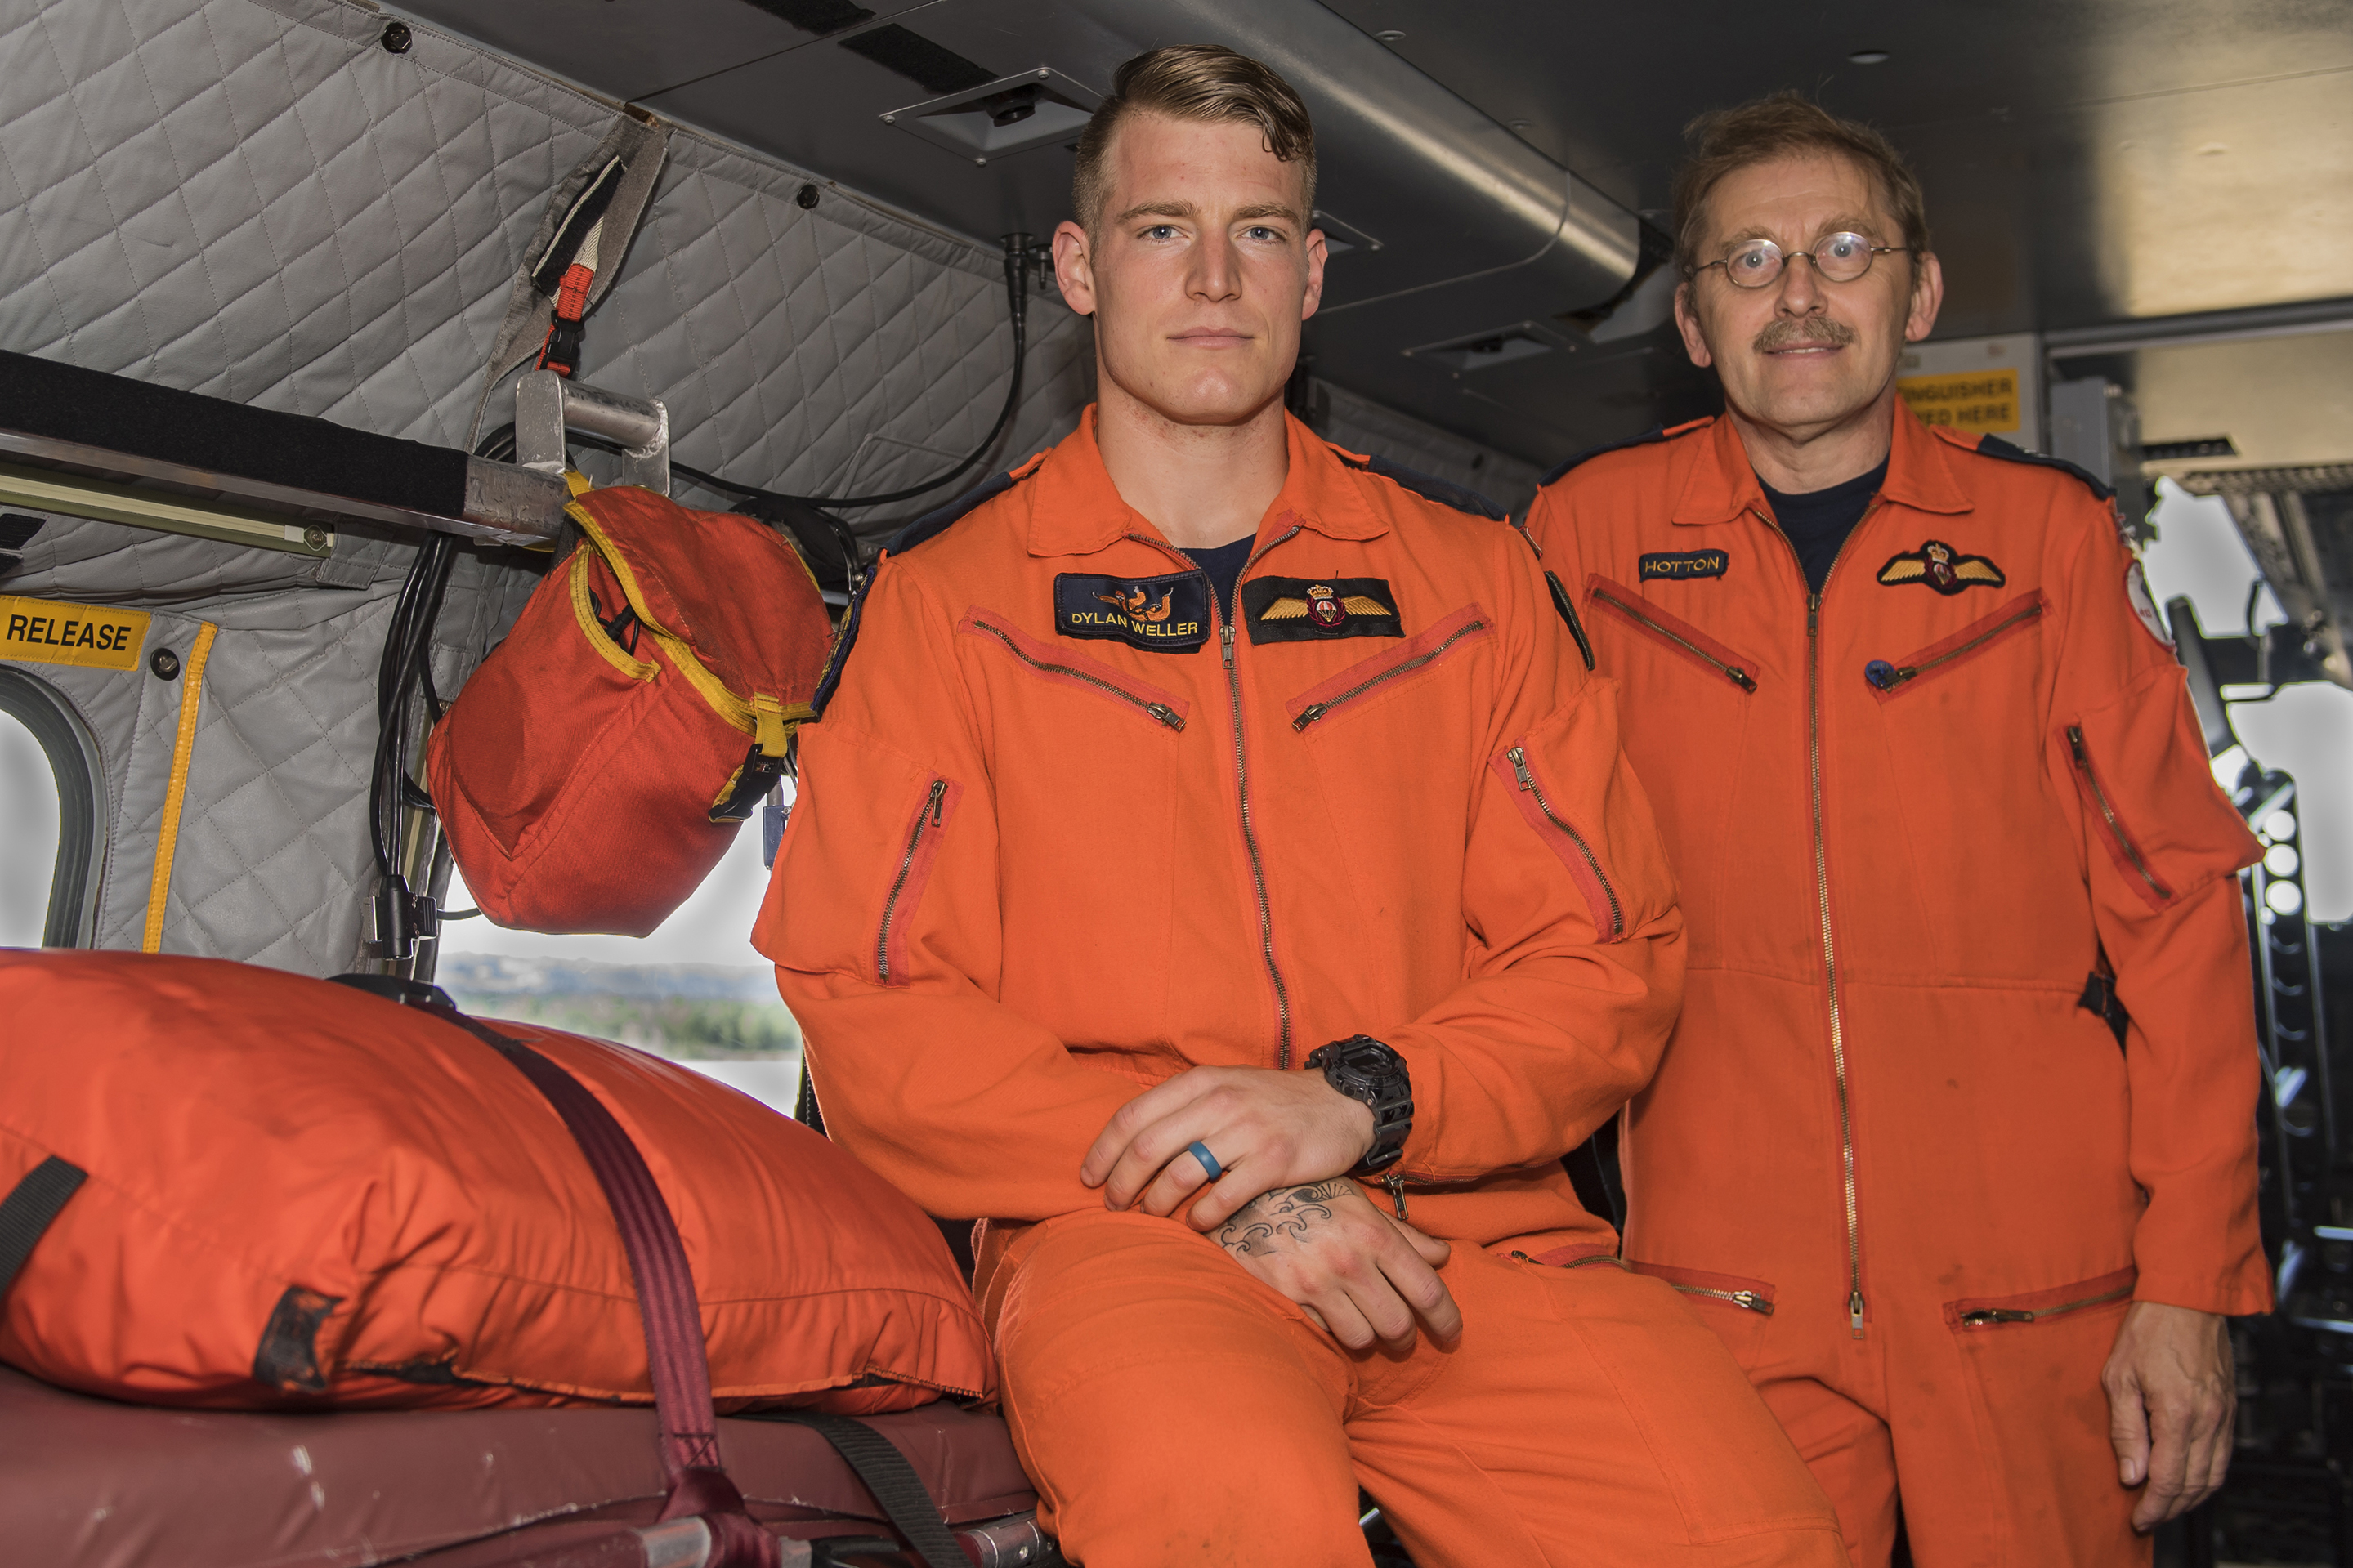 Two men in orange coveralls lean on a bunk in an aircraft.